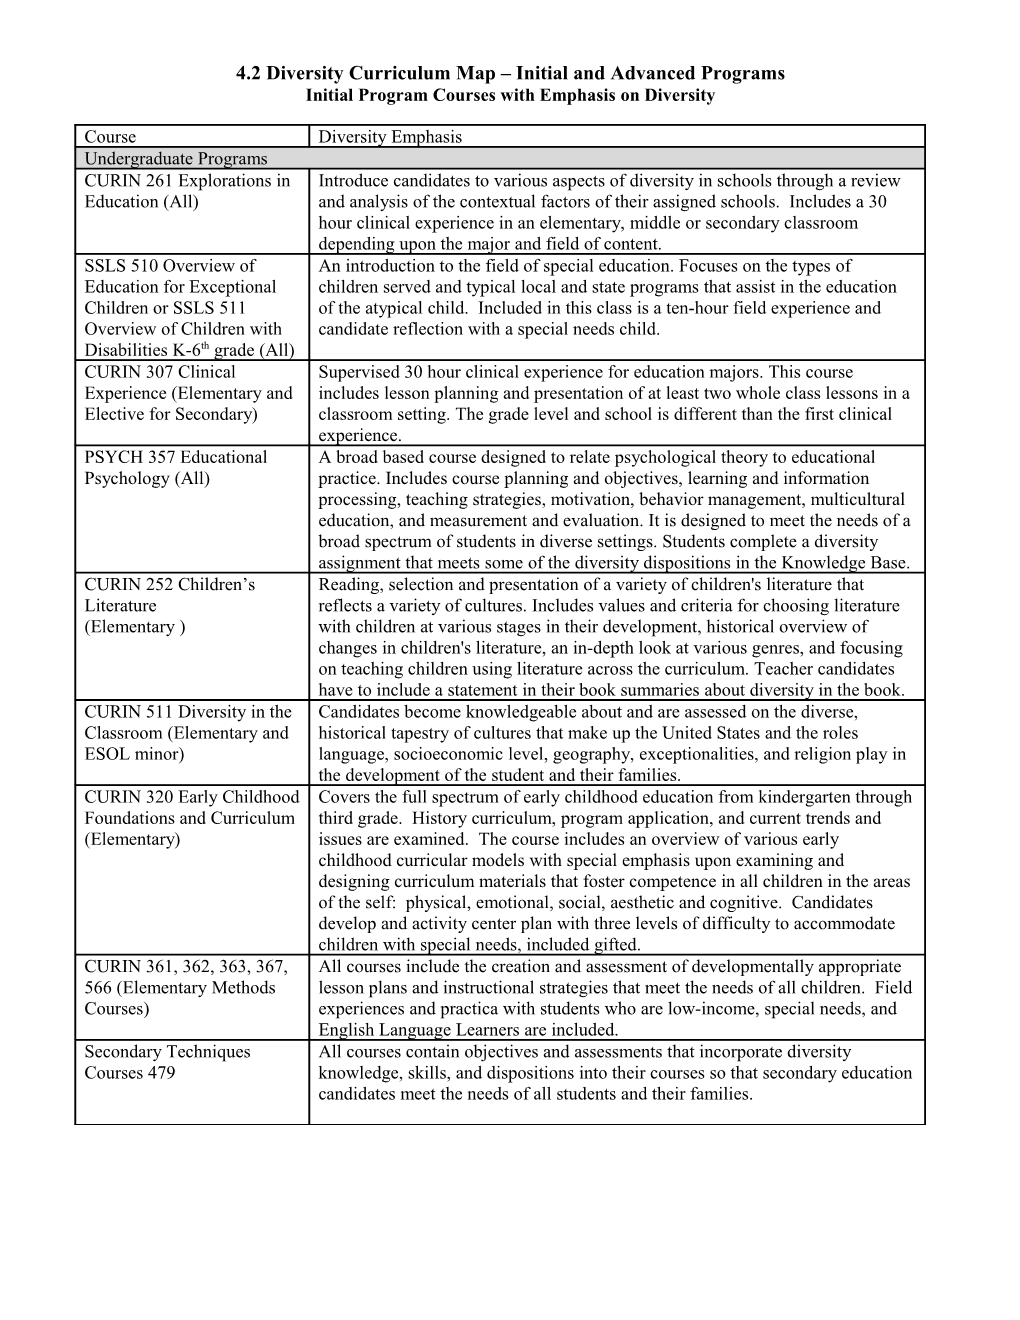 4.2 Diversity Curriculum Map Initial and Advanced Programs